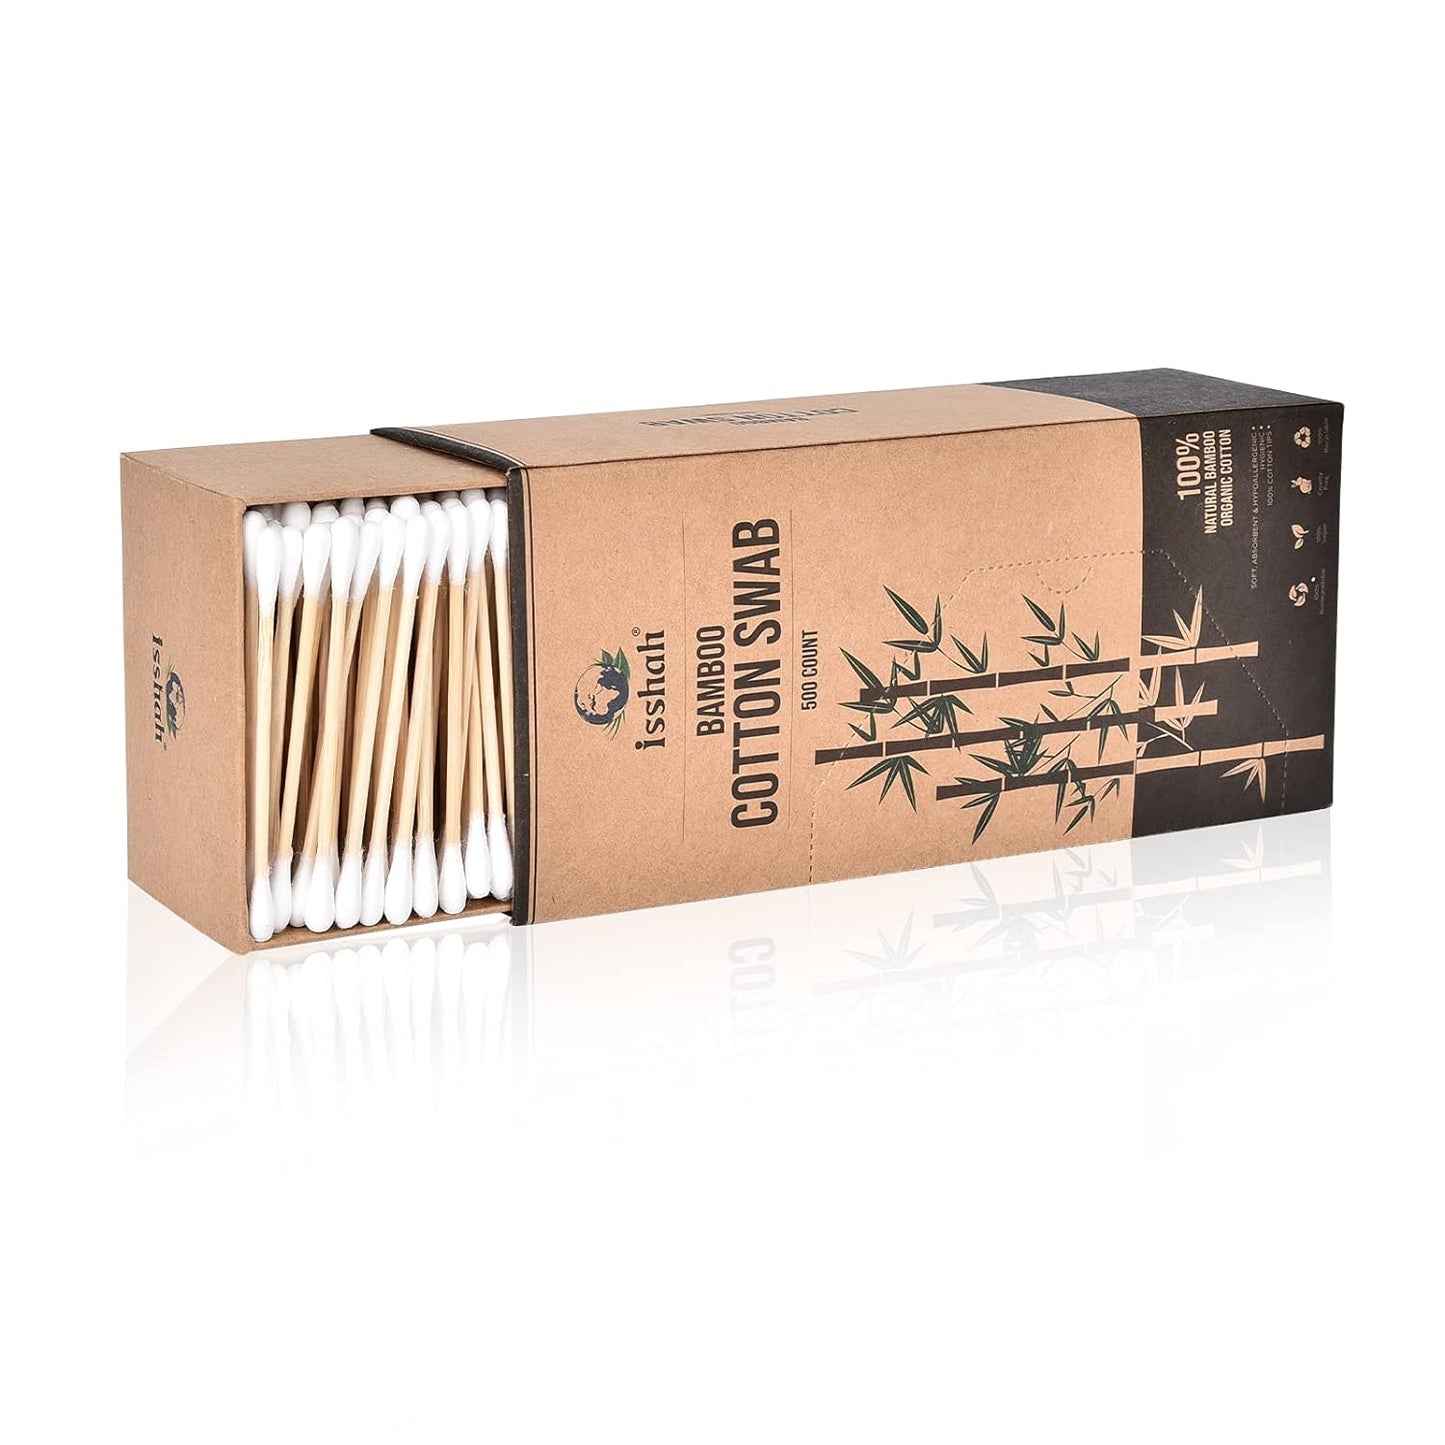 Bamboo Cotton Swabs - 500 Count. Vegan, Eco Friendly, All Natural and 100% Biodegradable Organic Cotton